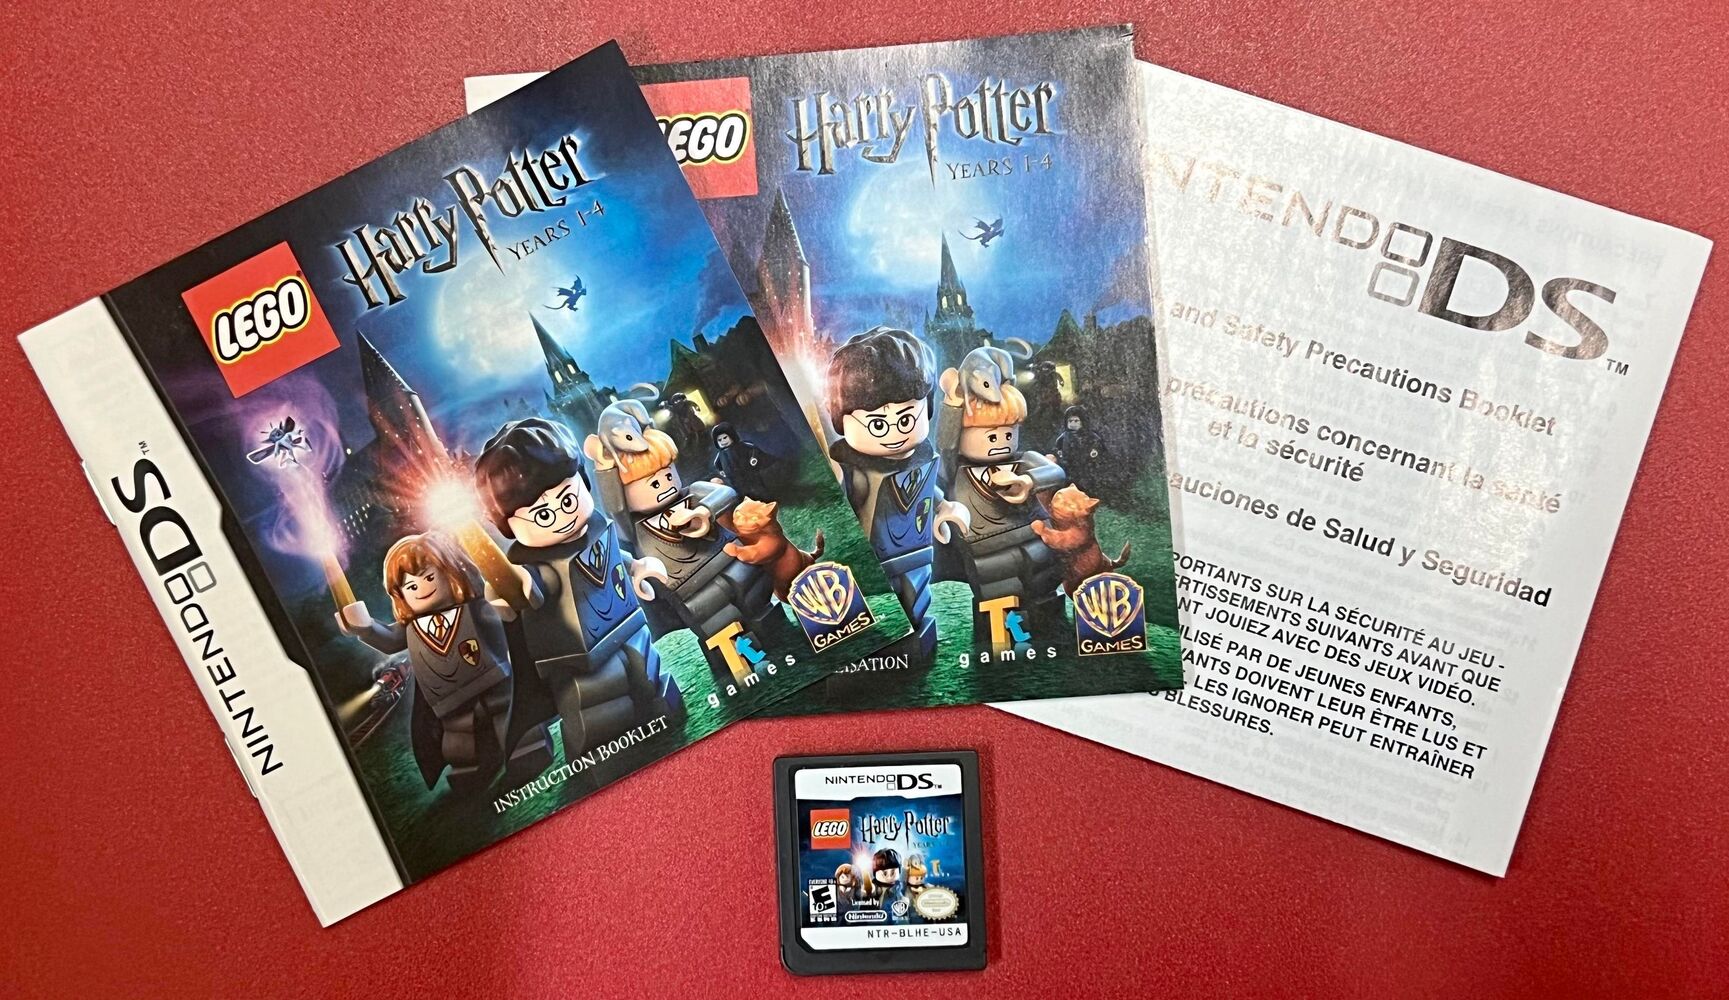 Lego Harry Potter Years 1-4 & 5-7 for Nintendo DS Bundle COMPLETE TESTED & WORKS